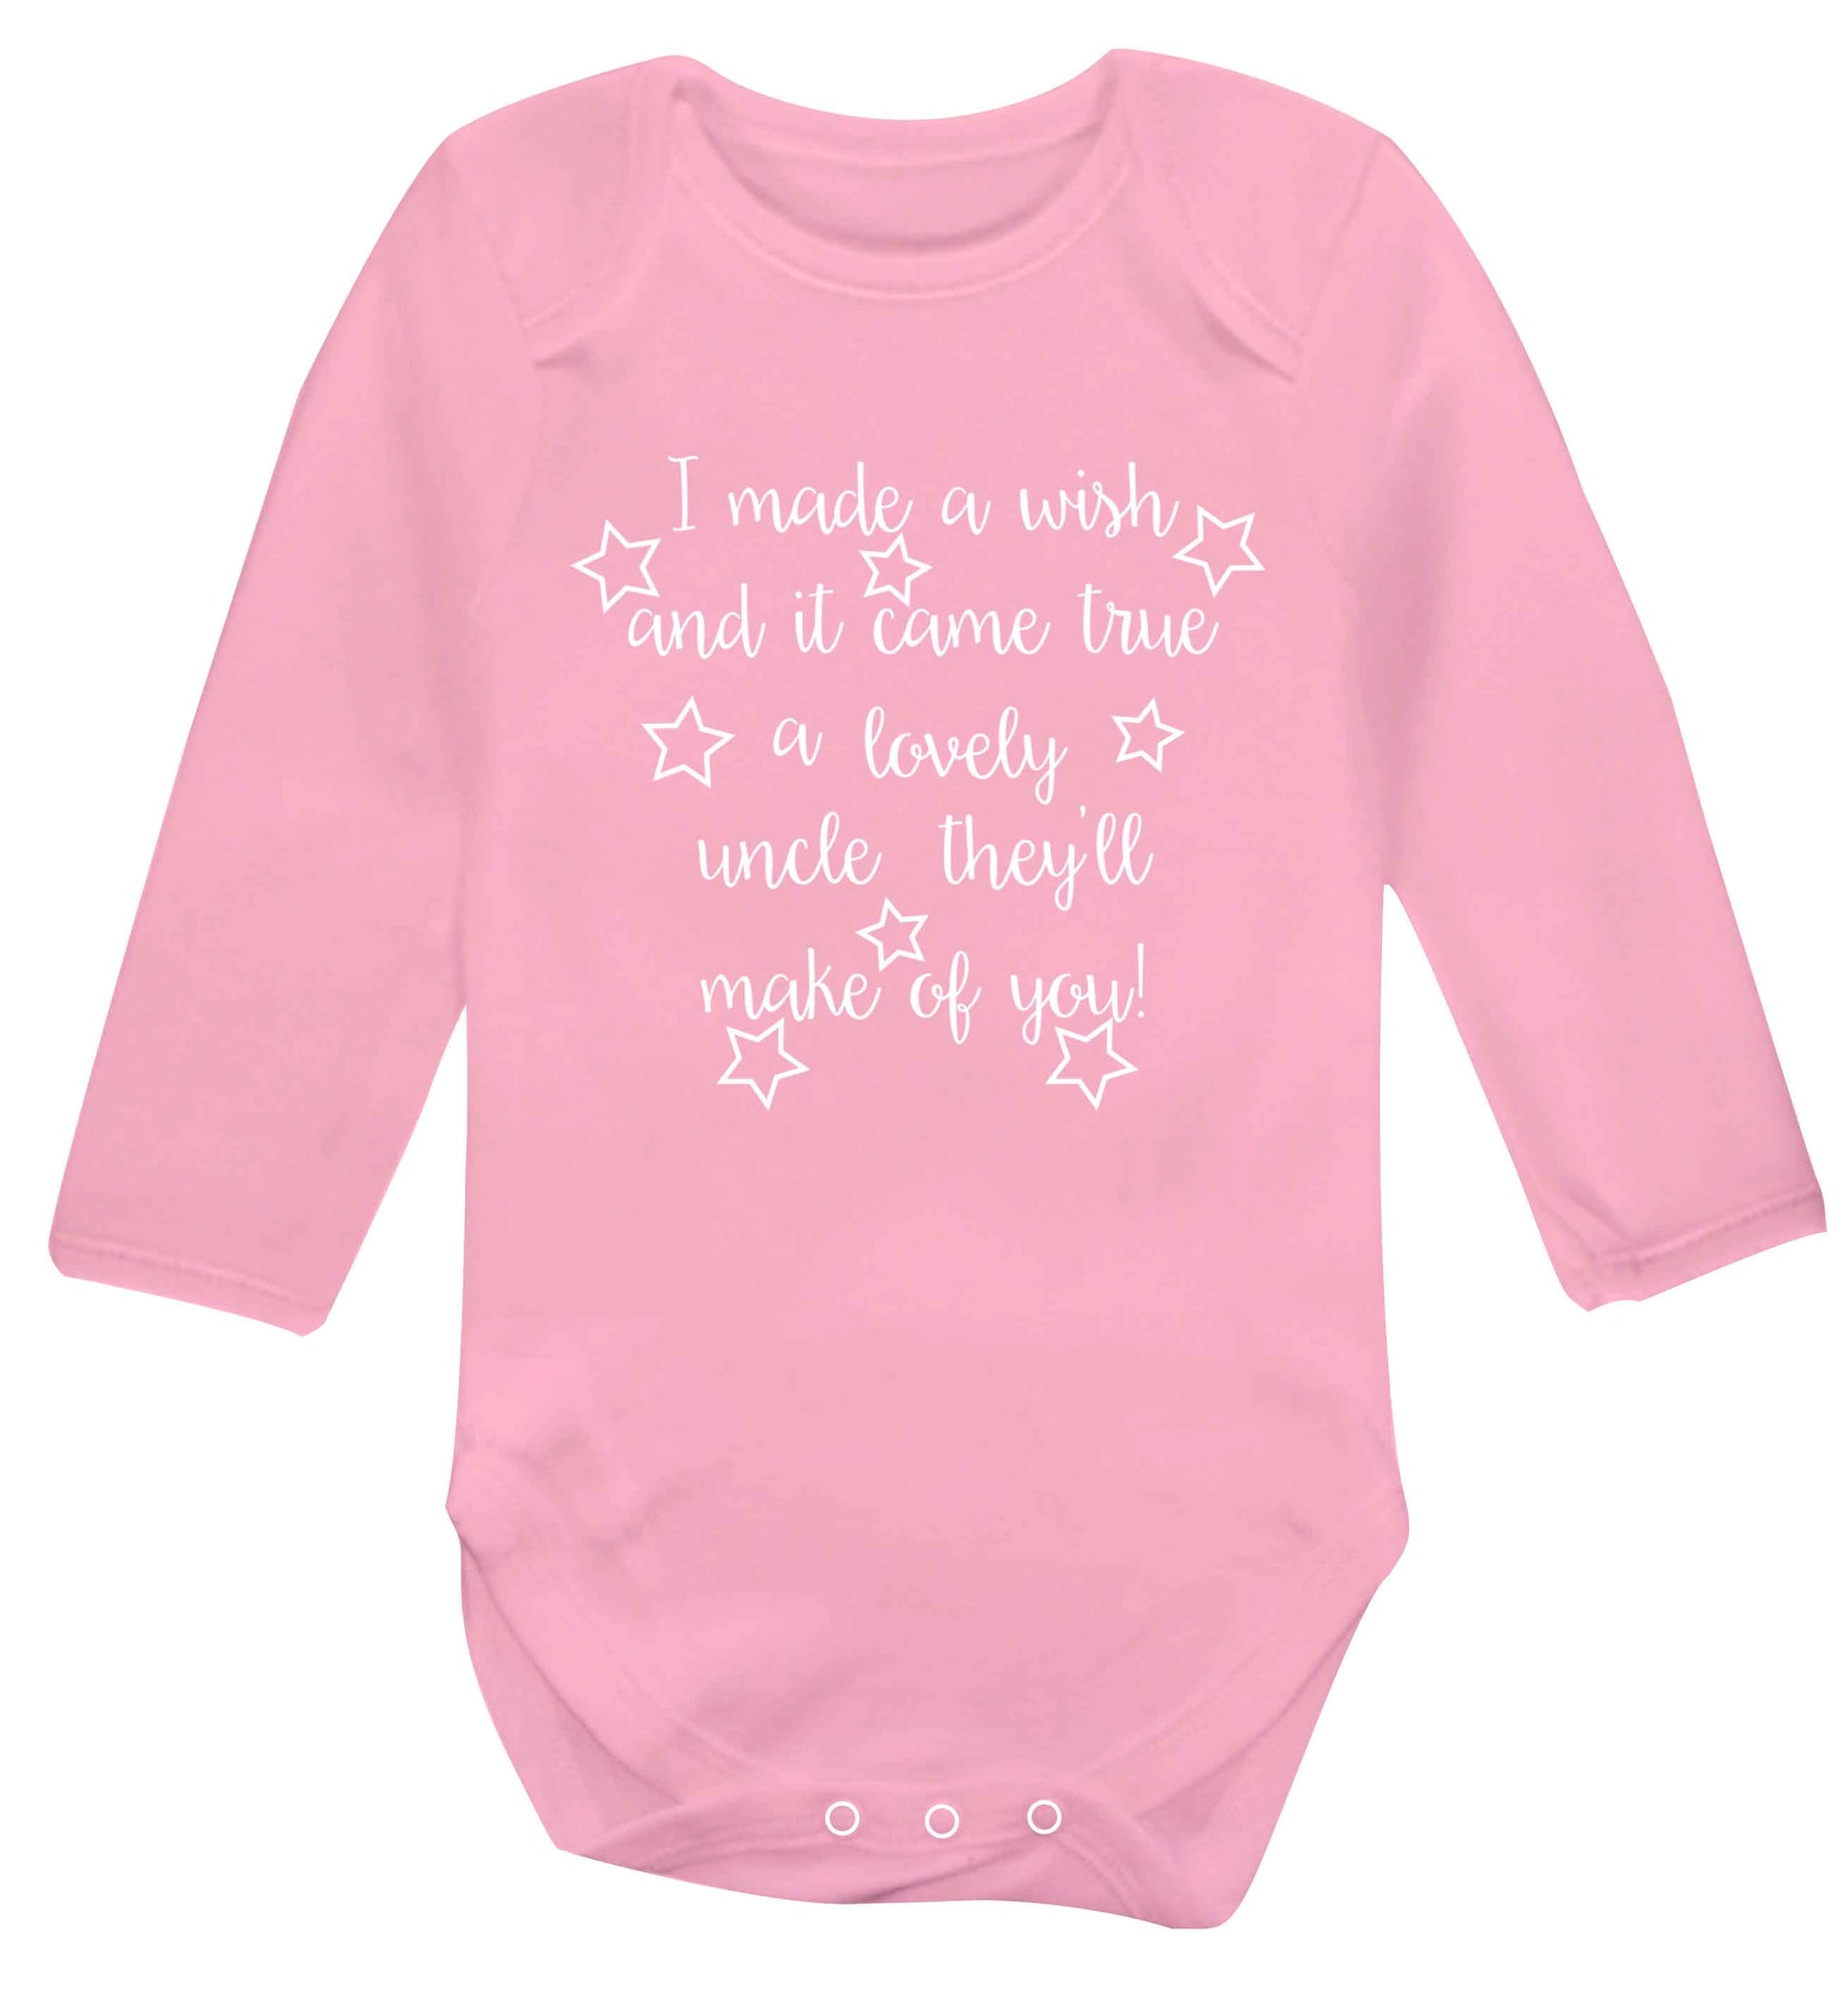 I made a wish and it came true a lovely uncle they'll make of you! Baby Vest long sleeved pale pink 6-12 months